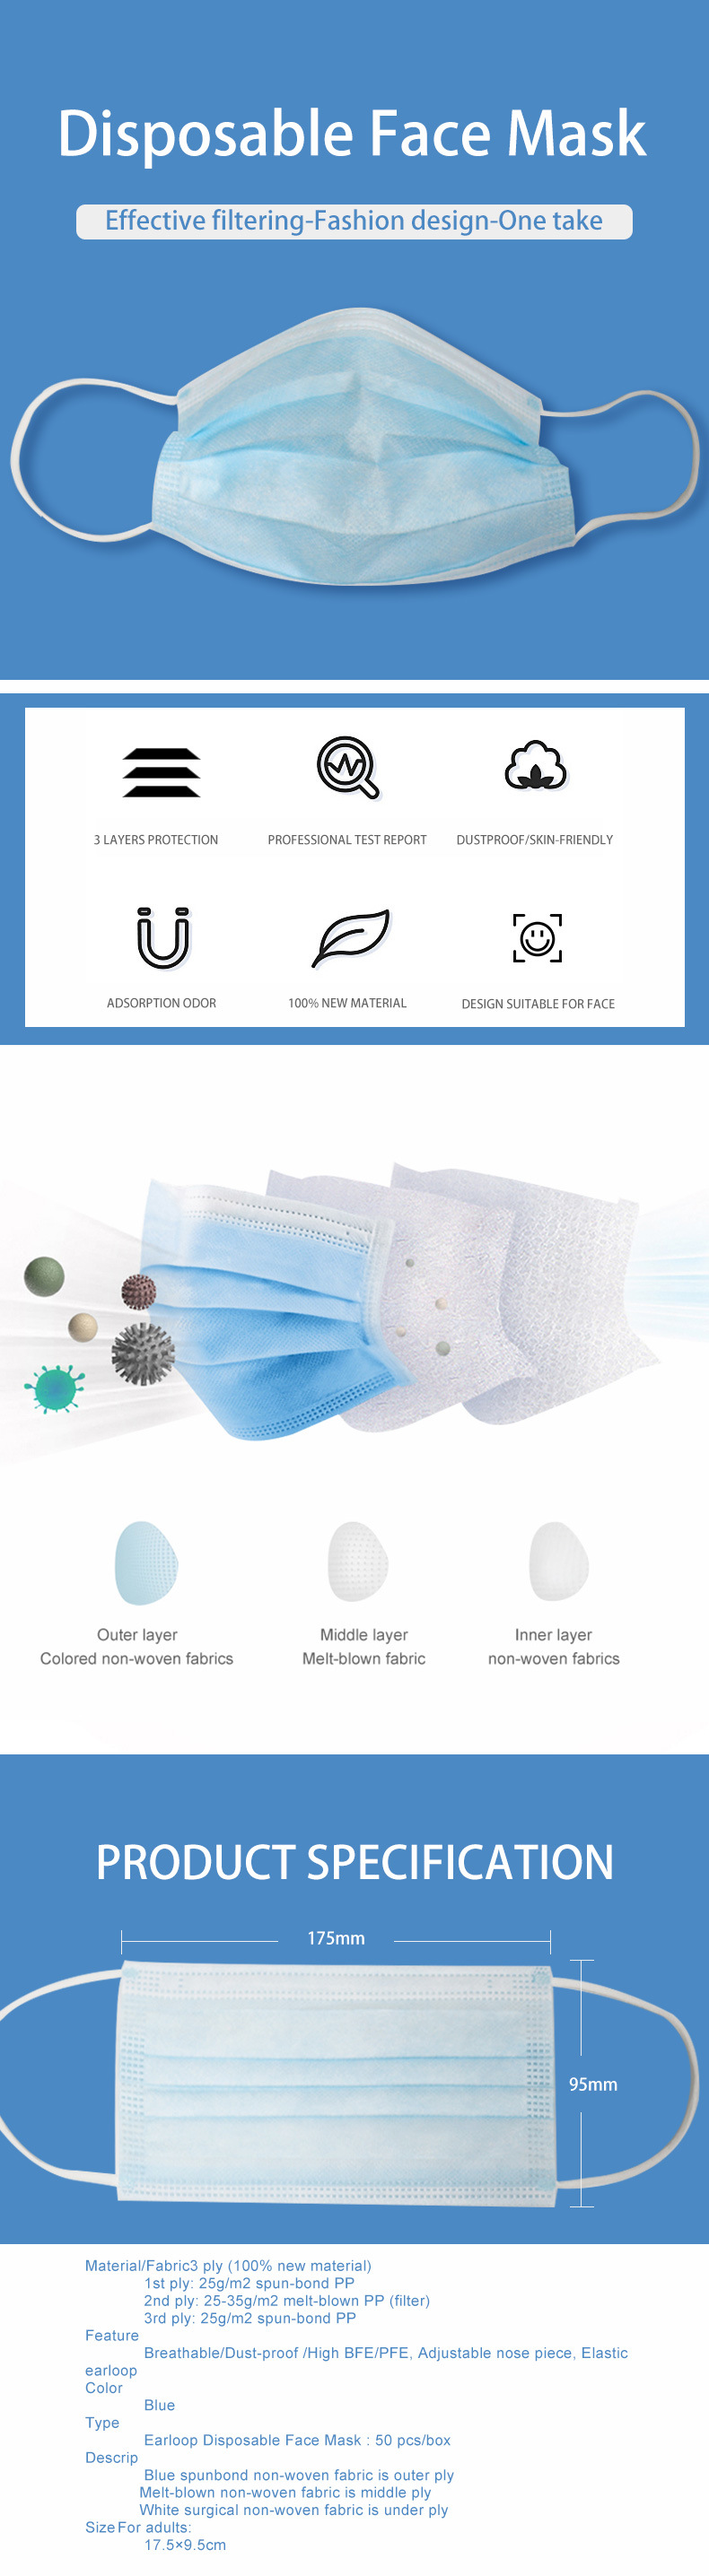 Anti Dust and Virus Protective 3 Ply Disposable Face Mask with Earloop Low Price Sterile Disposable Sterile 3 Ply Facemask